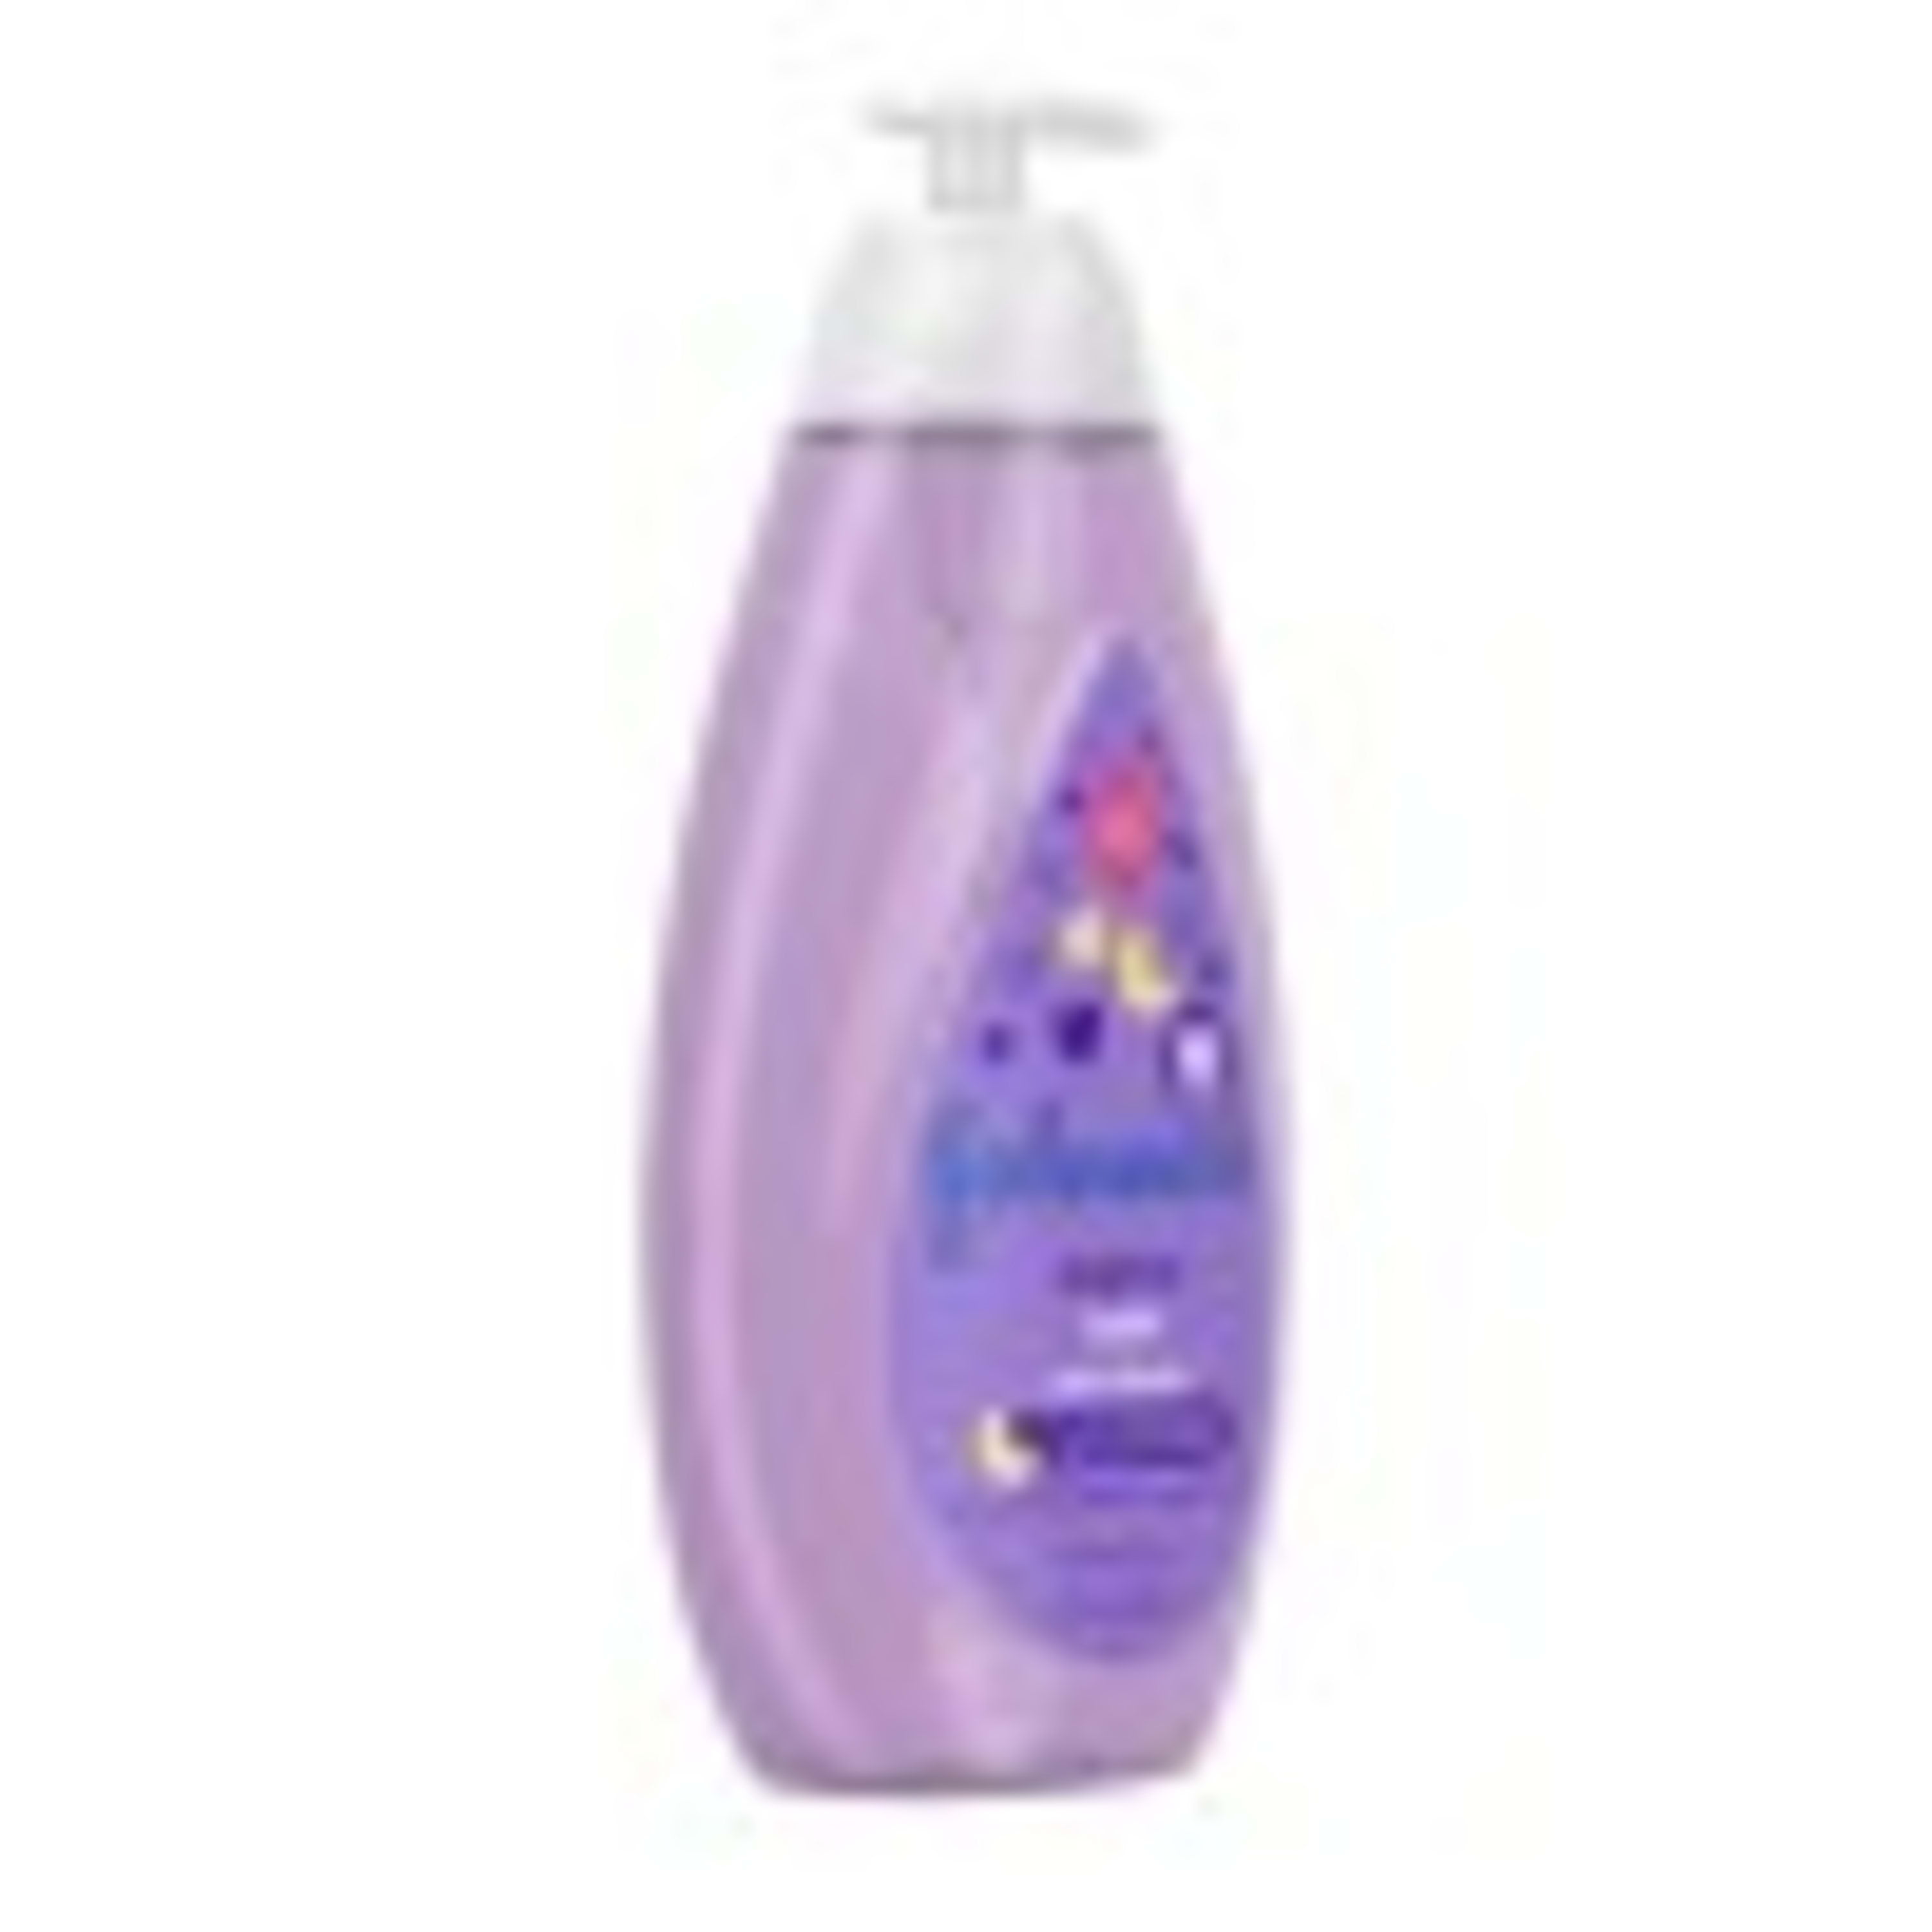 Johnson's Bedtime Baby Moisture Wash with Soothing Aromas, 27.1 fl. oz 